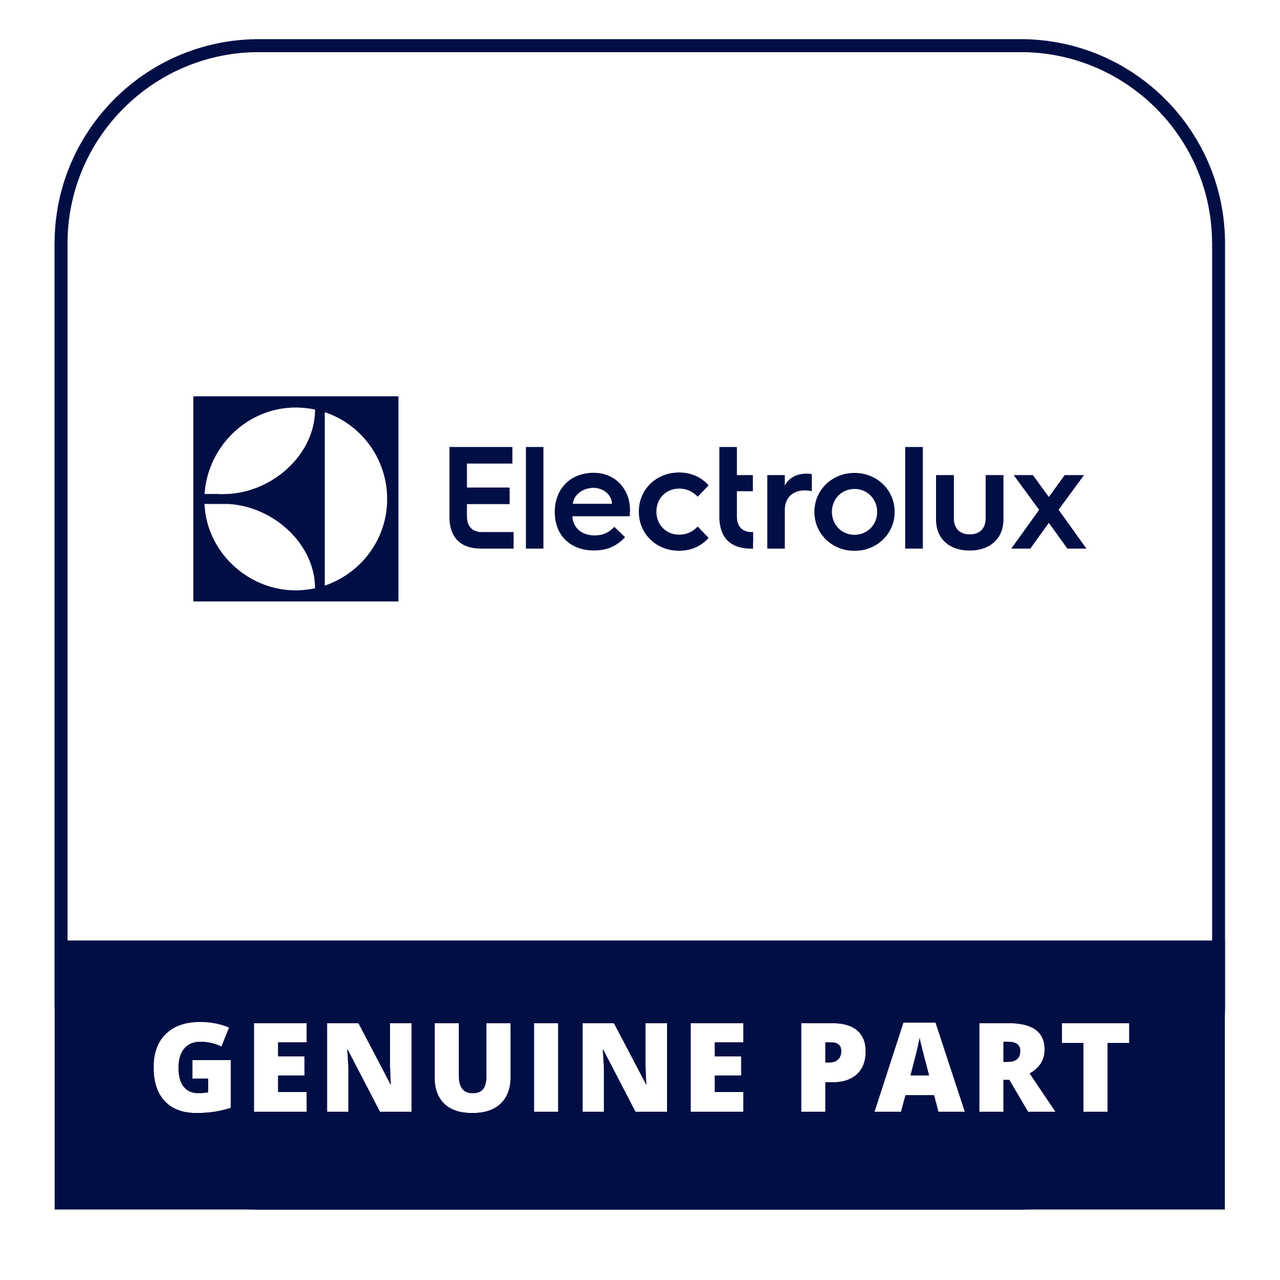 Frigidaire - Electrolux 316417329 Owners Manual - Genuine Electrolux Part